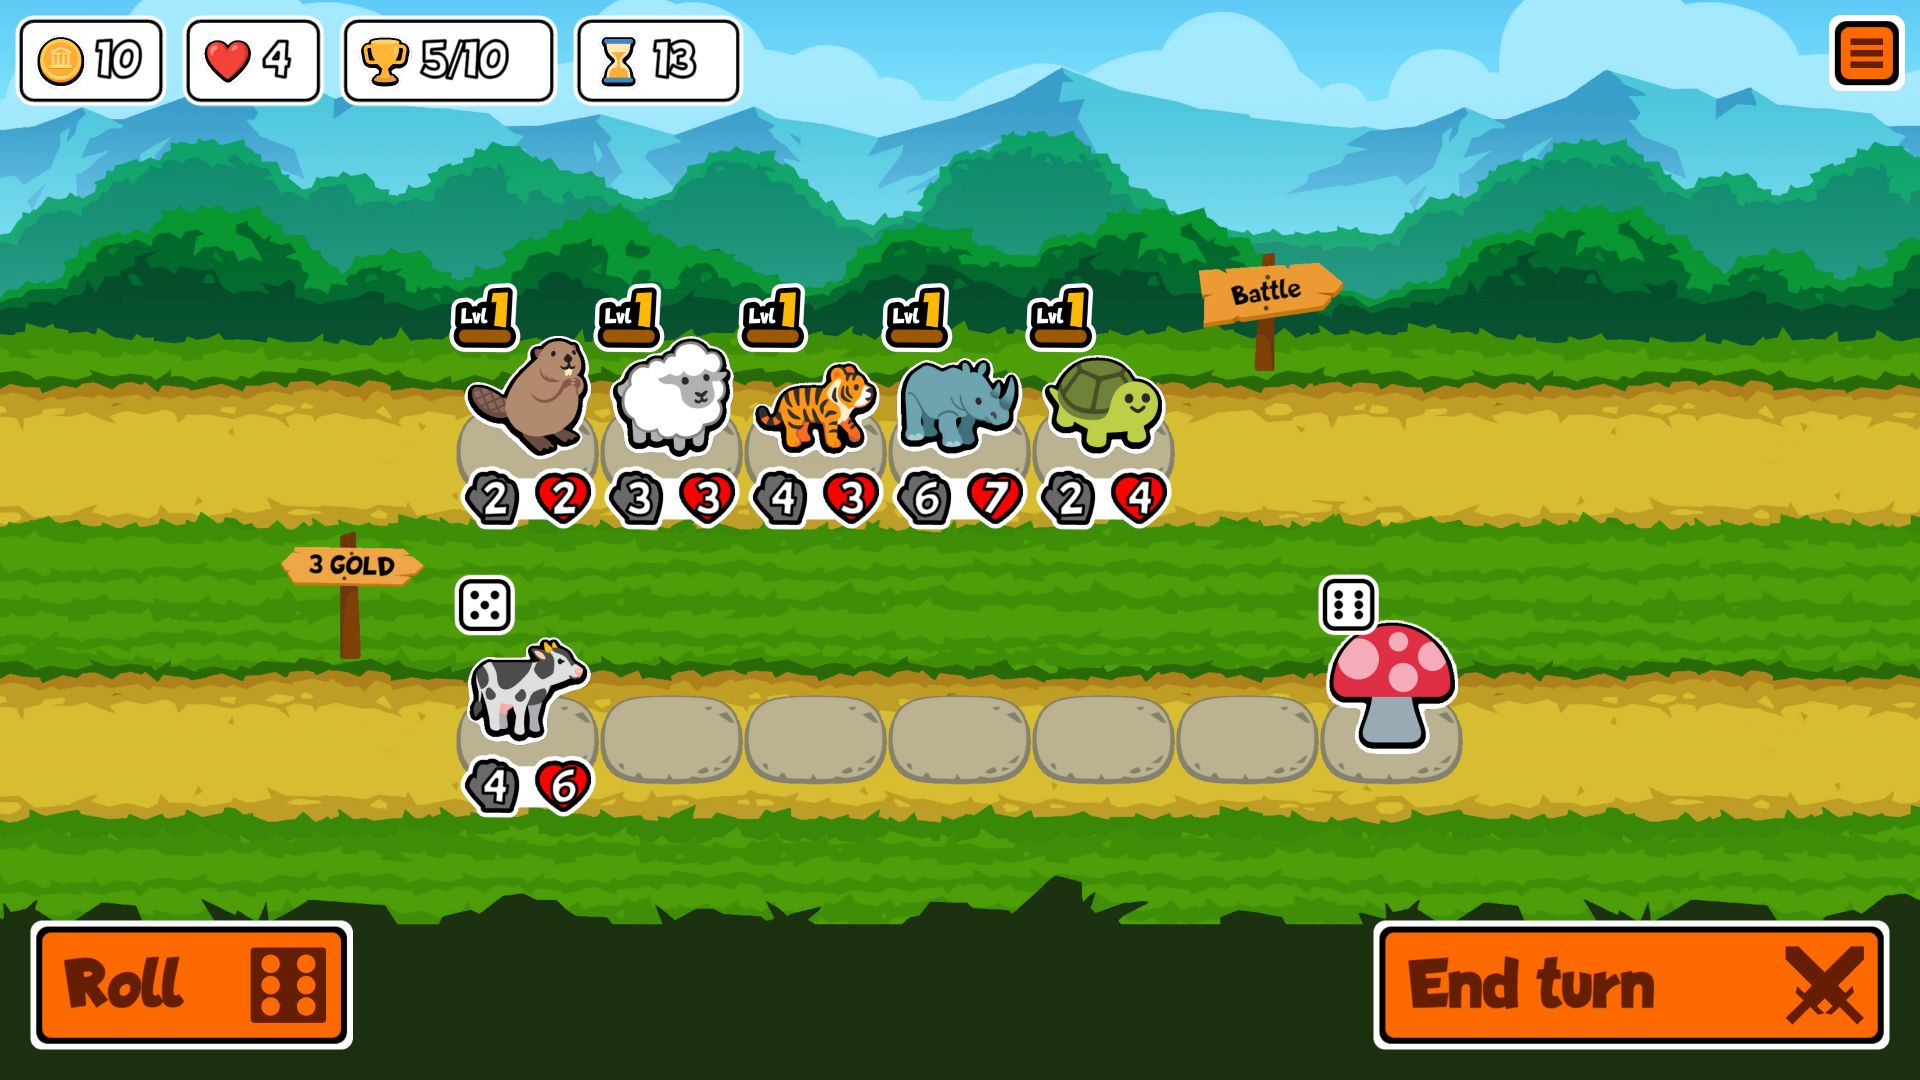 Gameplay of the Super Auto Pets for Android phone or tablet.